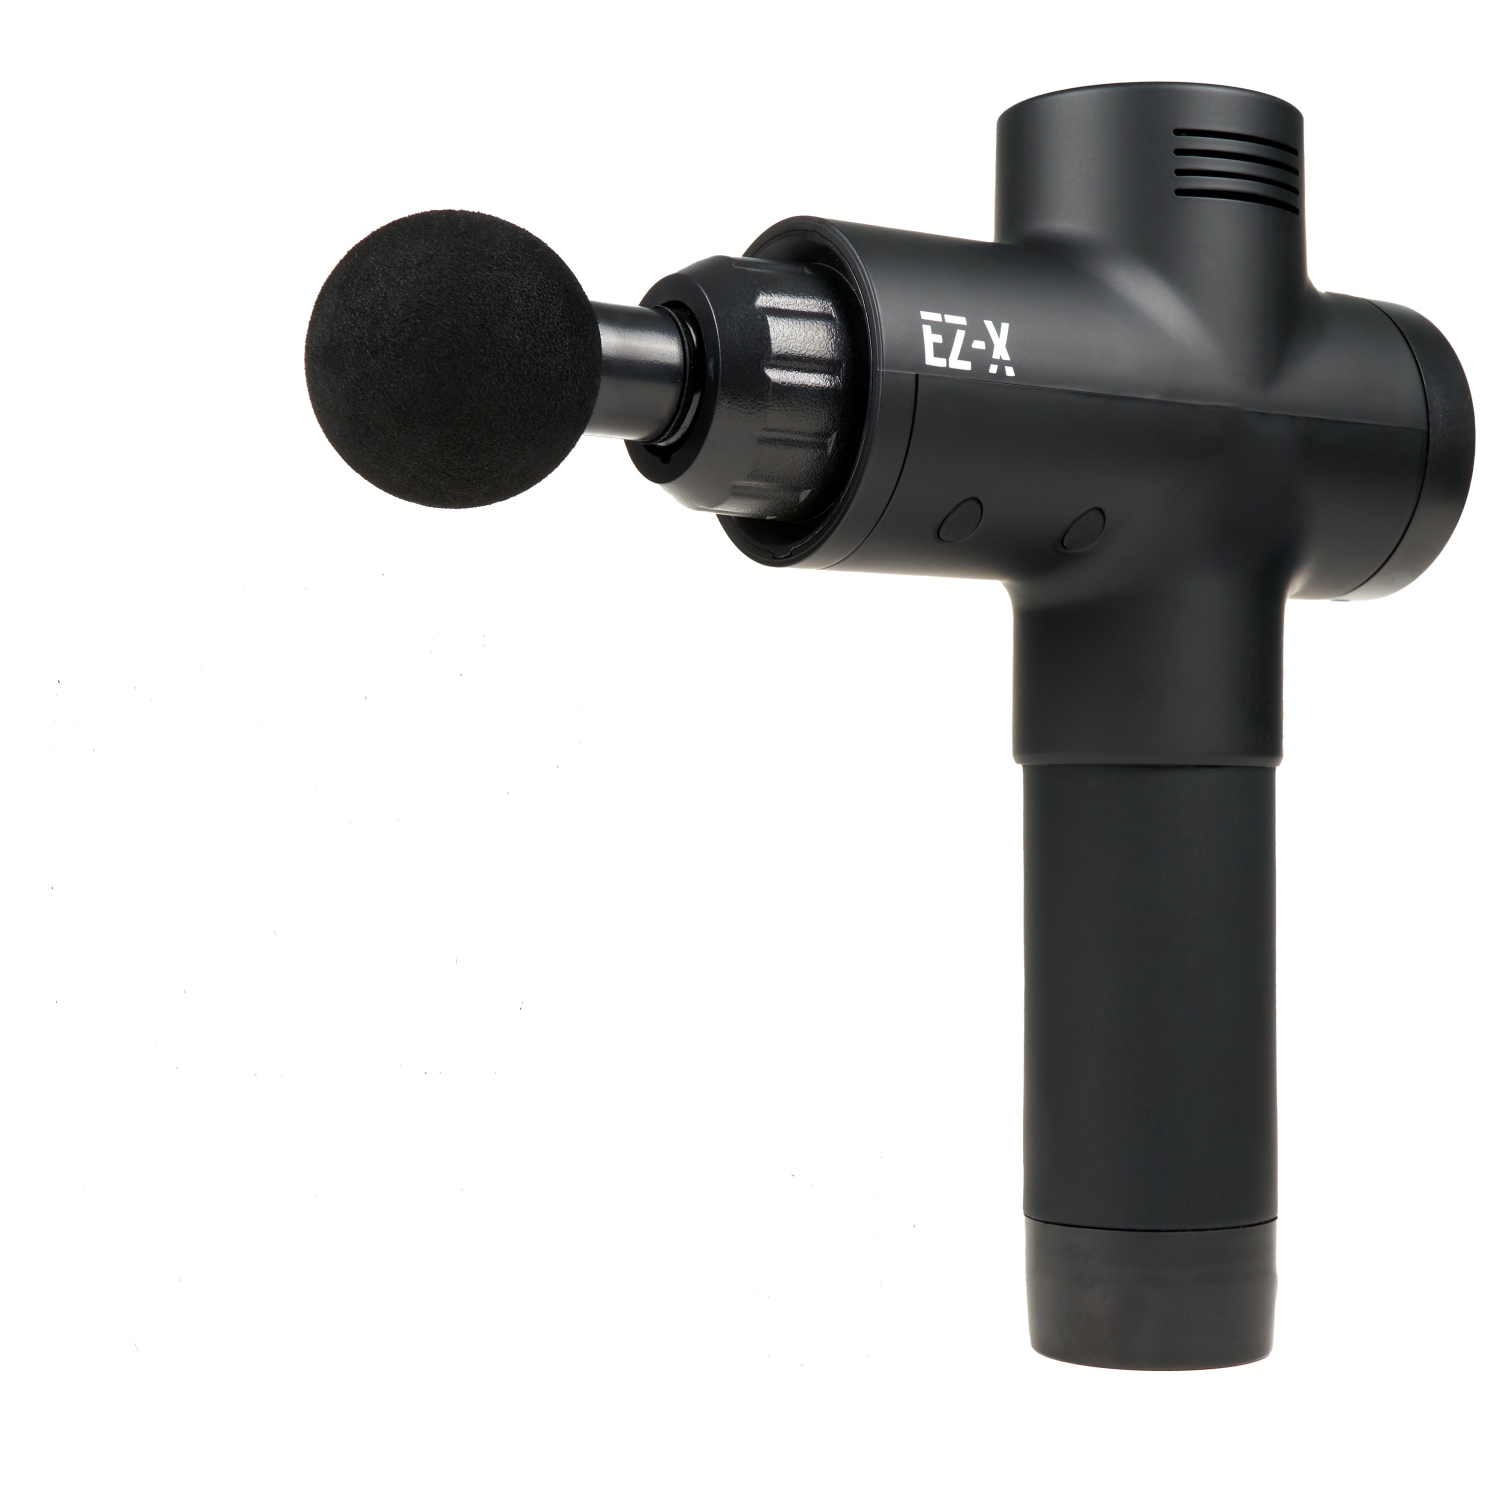 EZ-X Premium Percussion Massage Gun - 30 Speeds - 6 Heads - Extra Quiet -  Extra Power - Portable Handheld Deep Tissue Therapy Pain Relief [with  Carrying Case] | Best Buy Canada